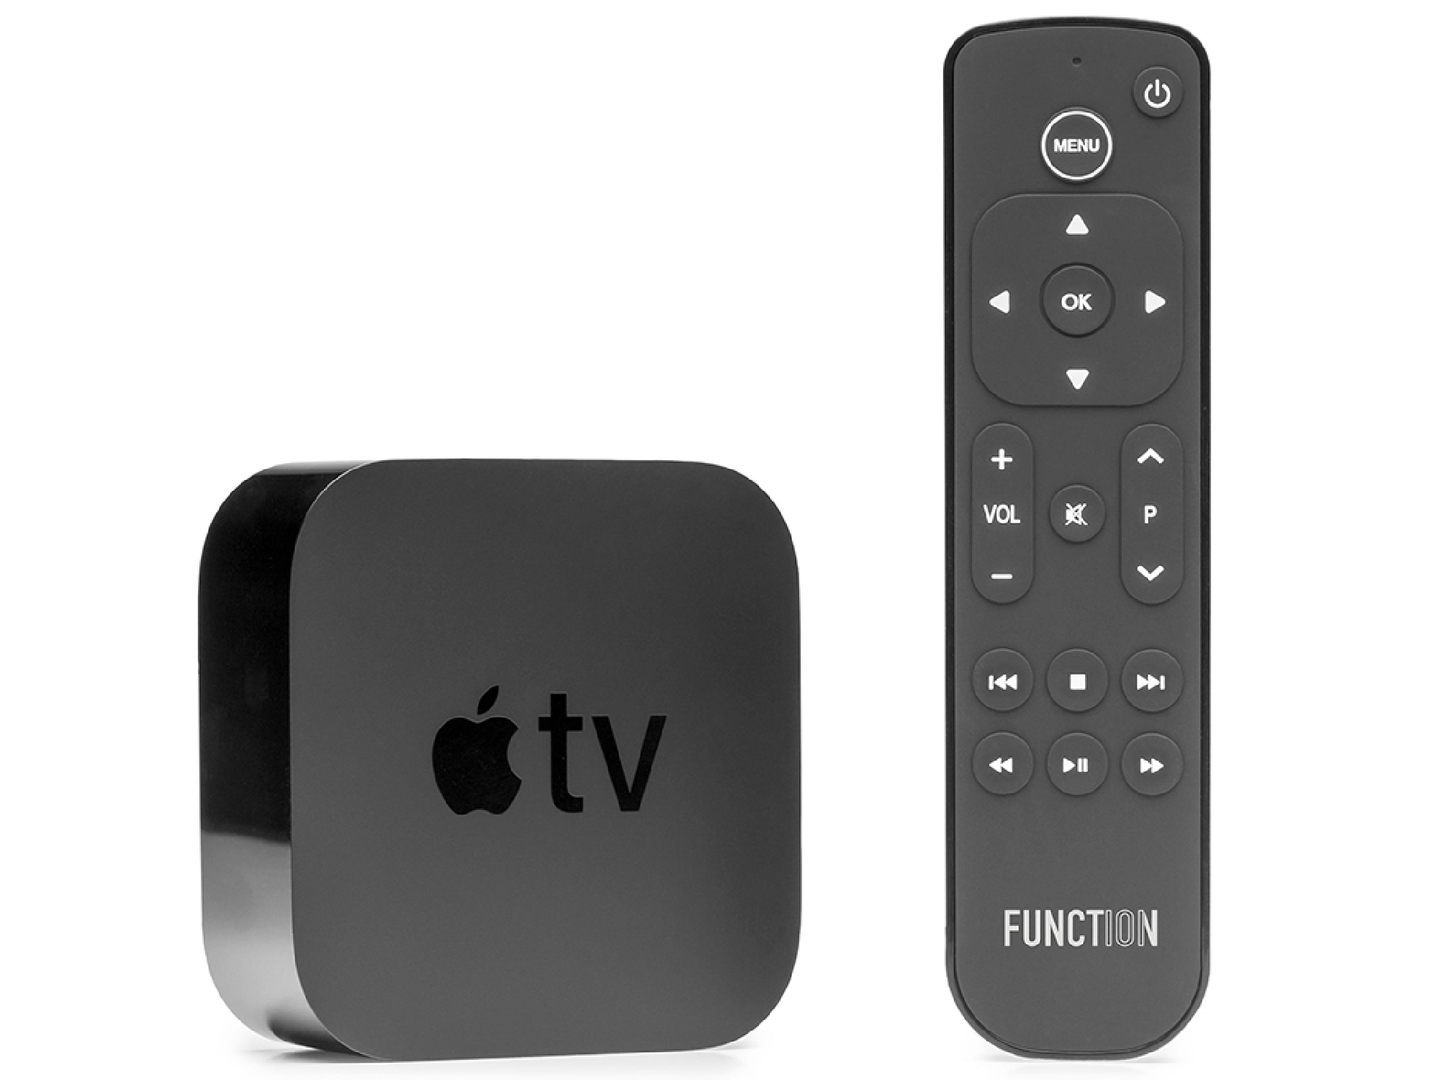 An Apple TV and Function101 4K smart TV remote on a plain background.